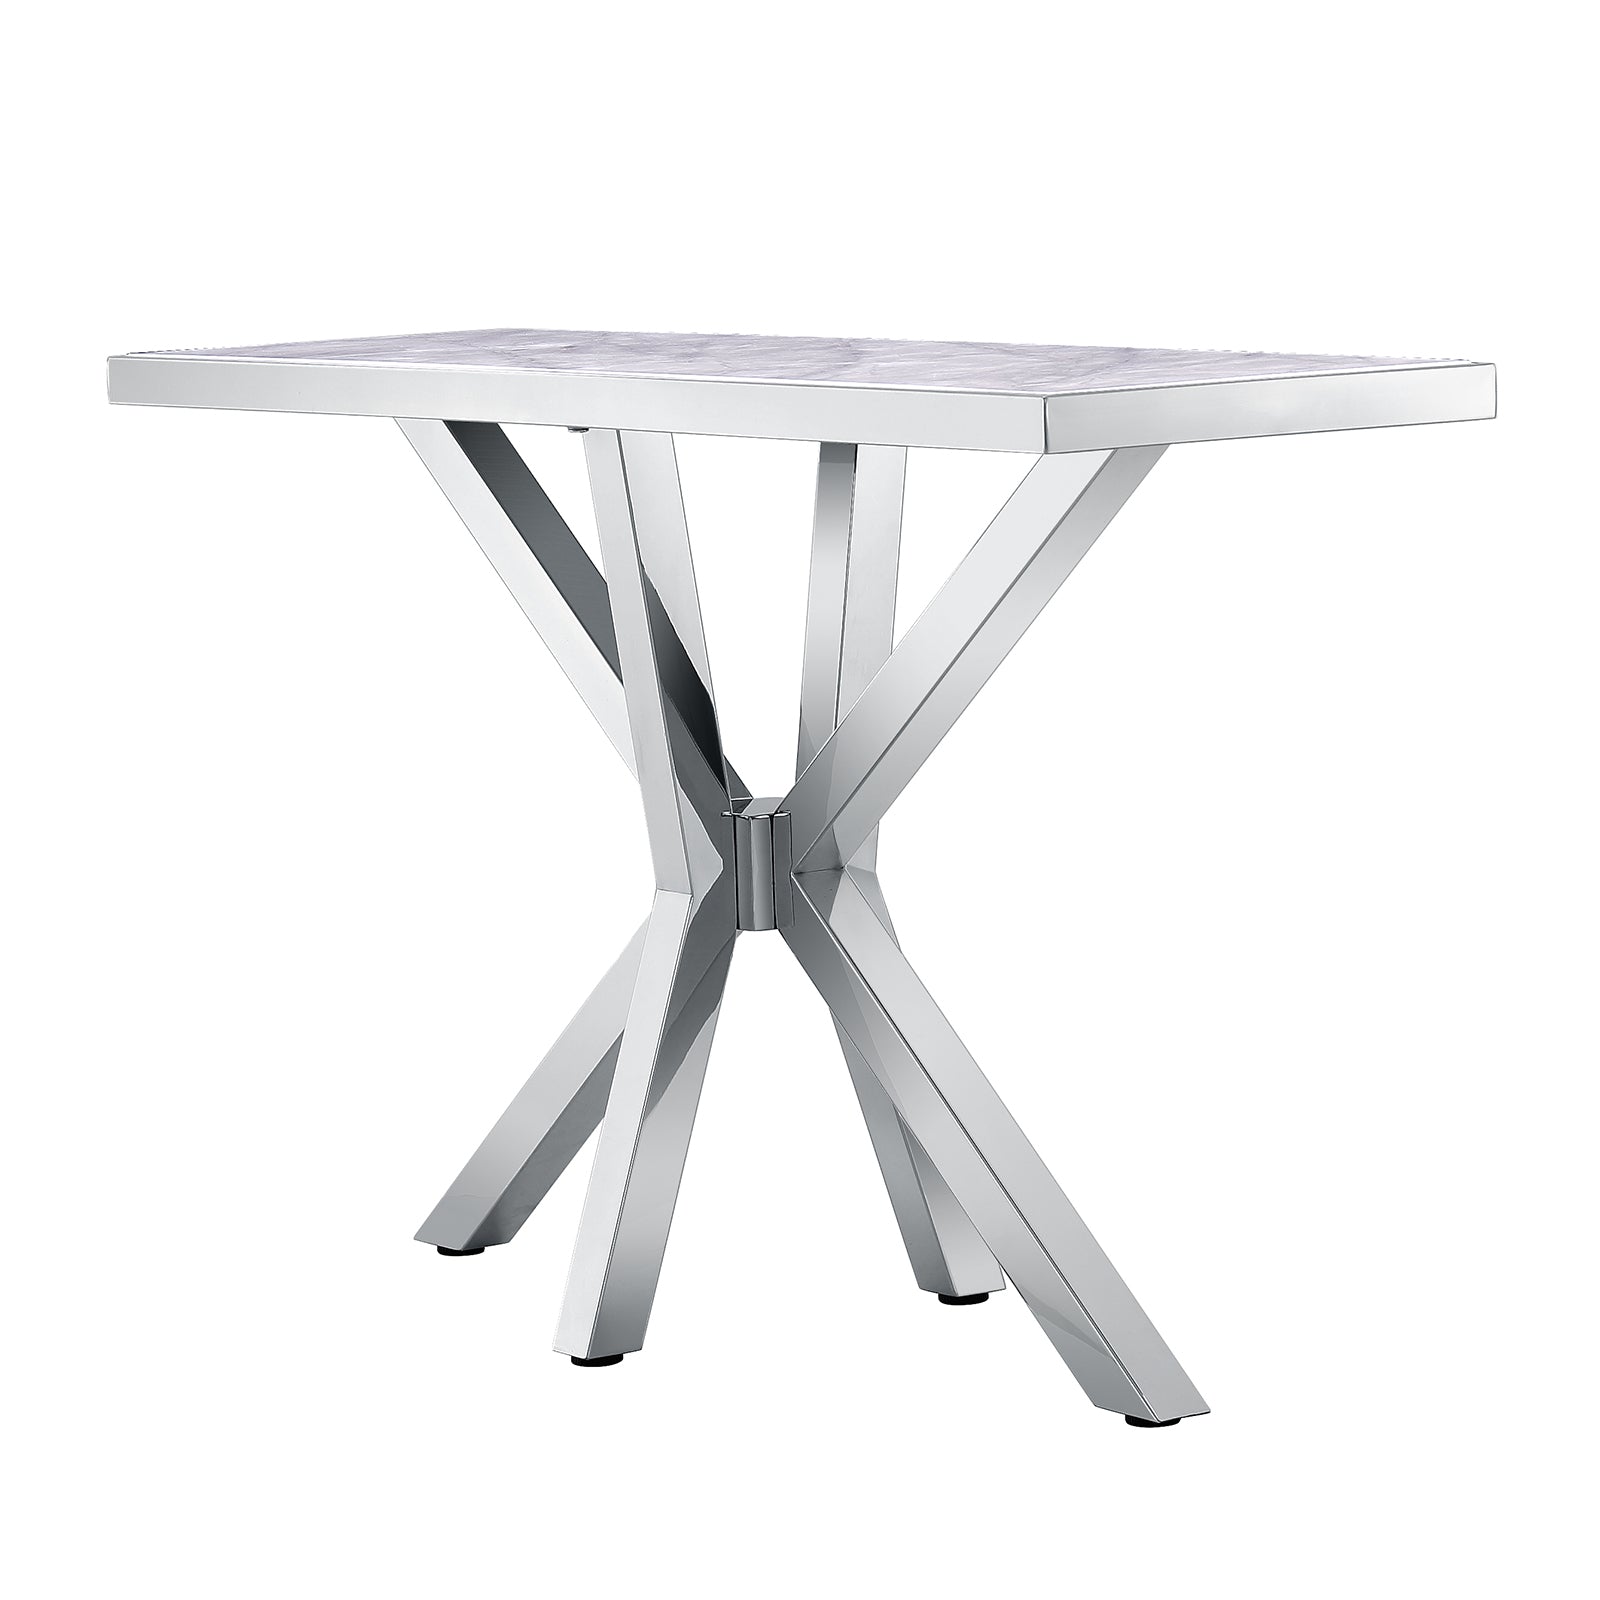 Silver and Gray Living room table Set| Metal X Base | L216